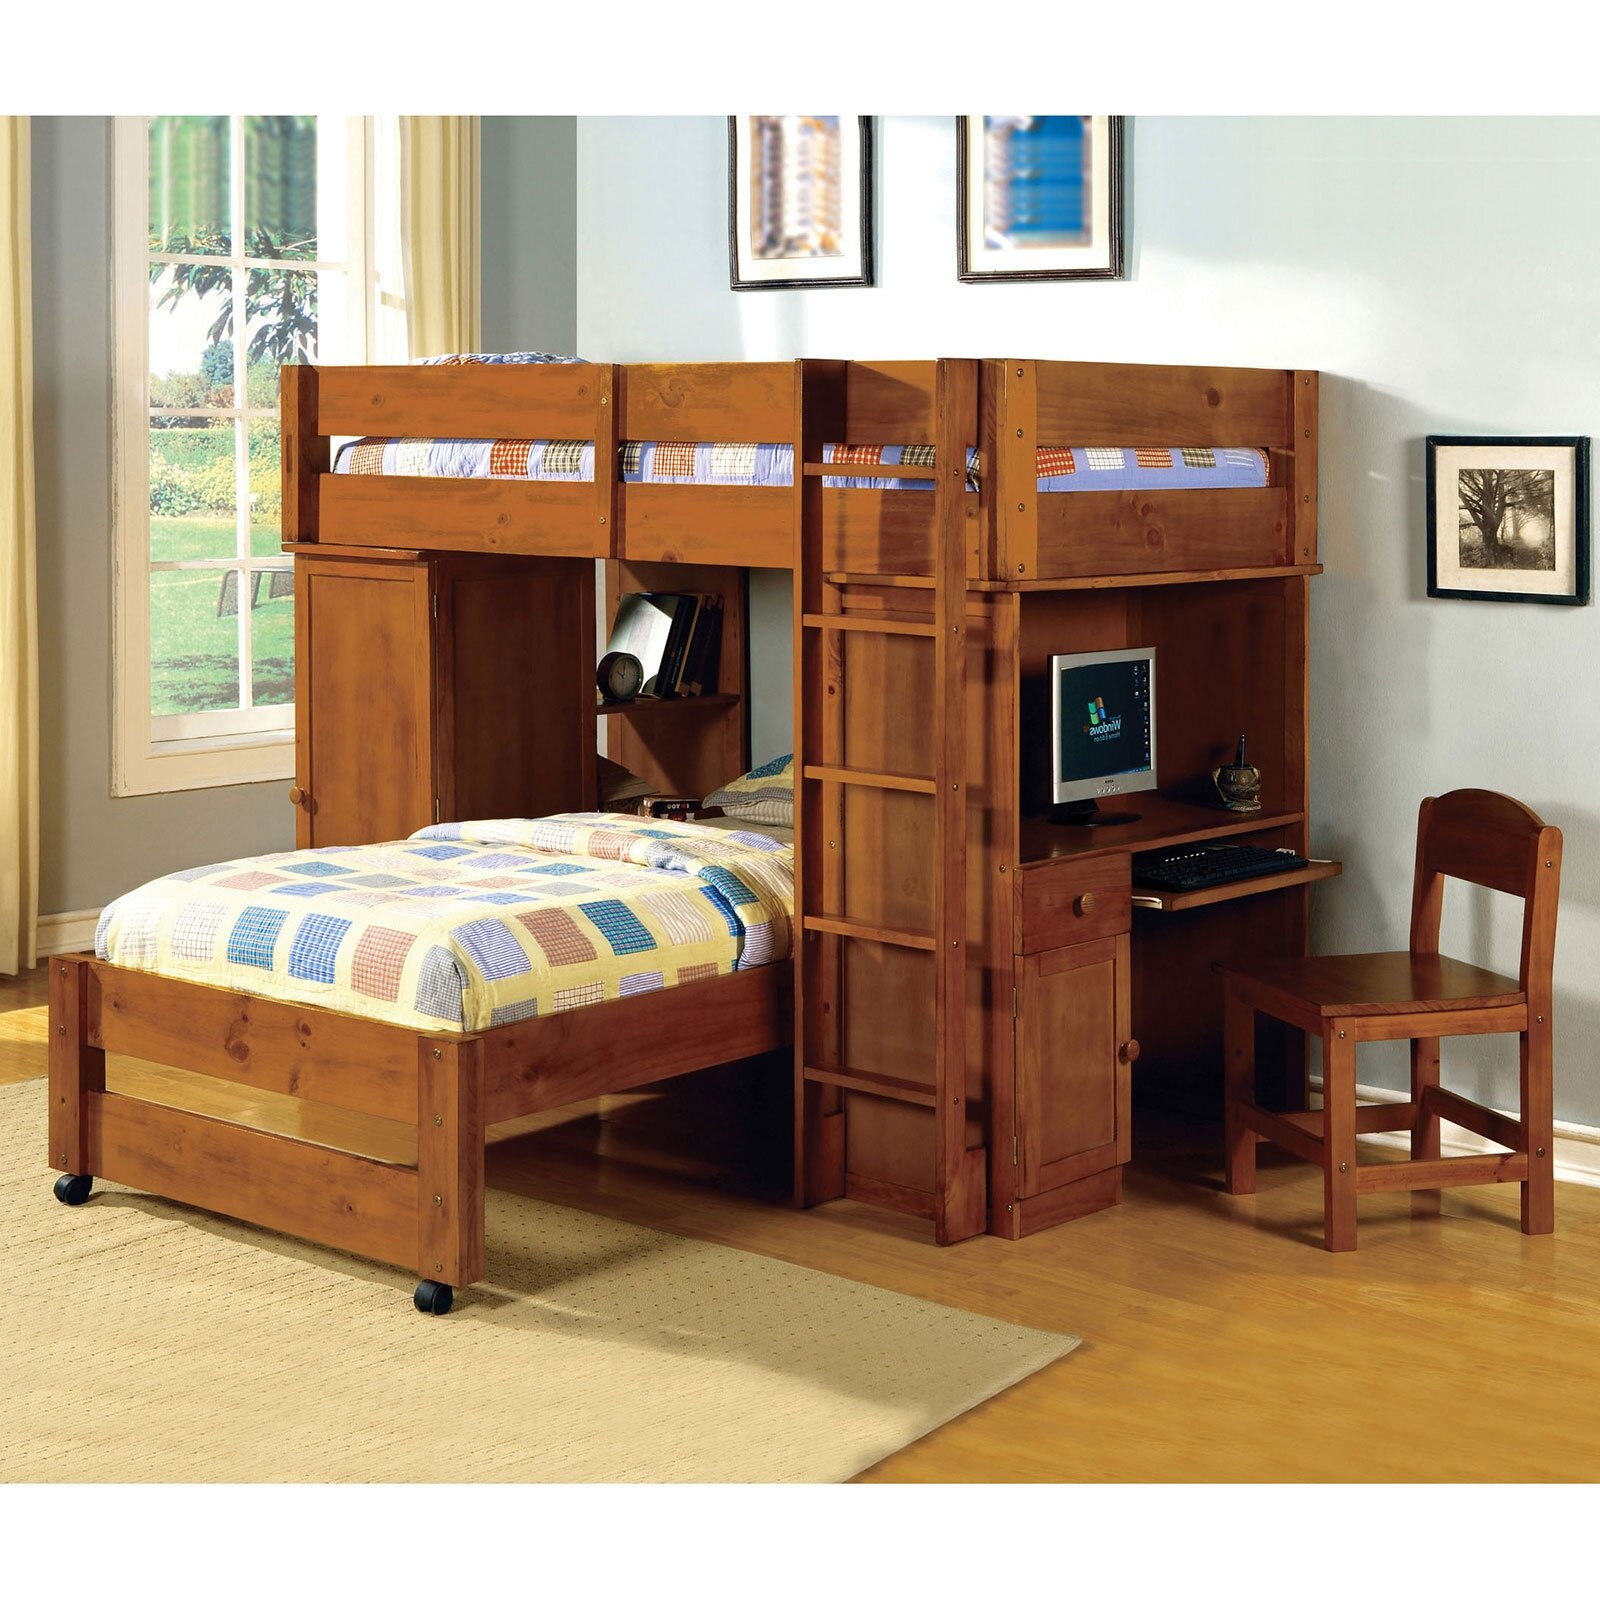 Harriet Bee Cray Twin L Shape Bunk Bed With Bookcase And Drawers